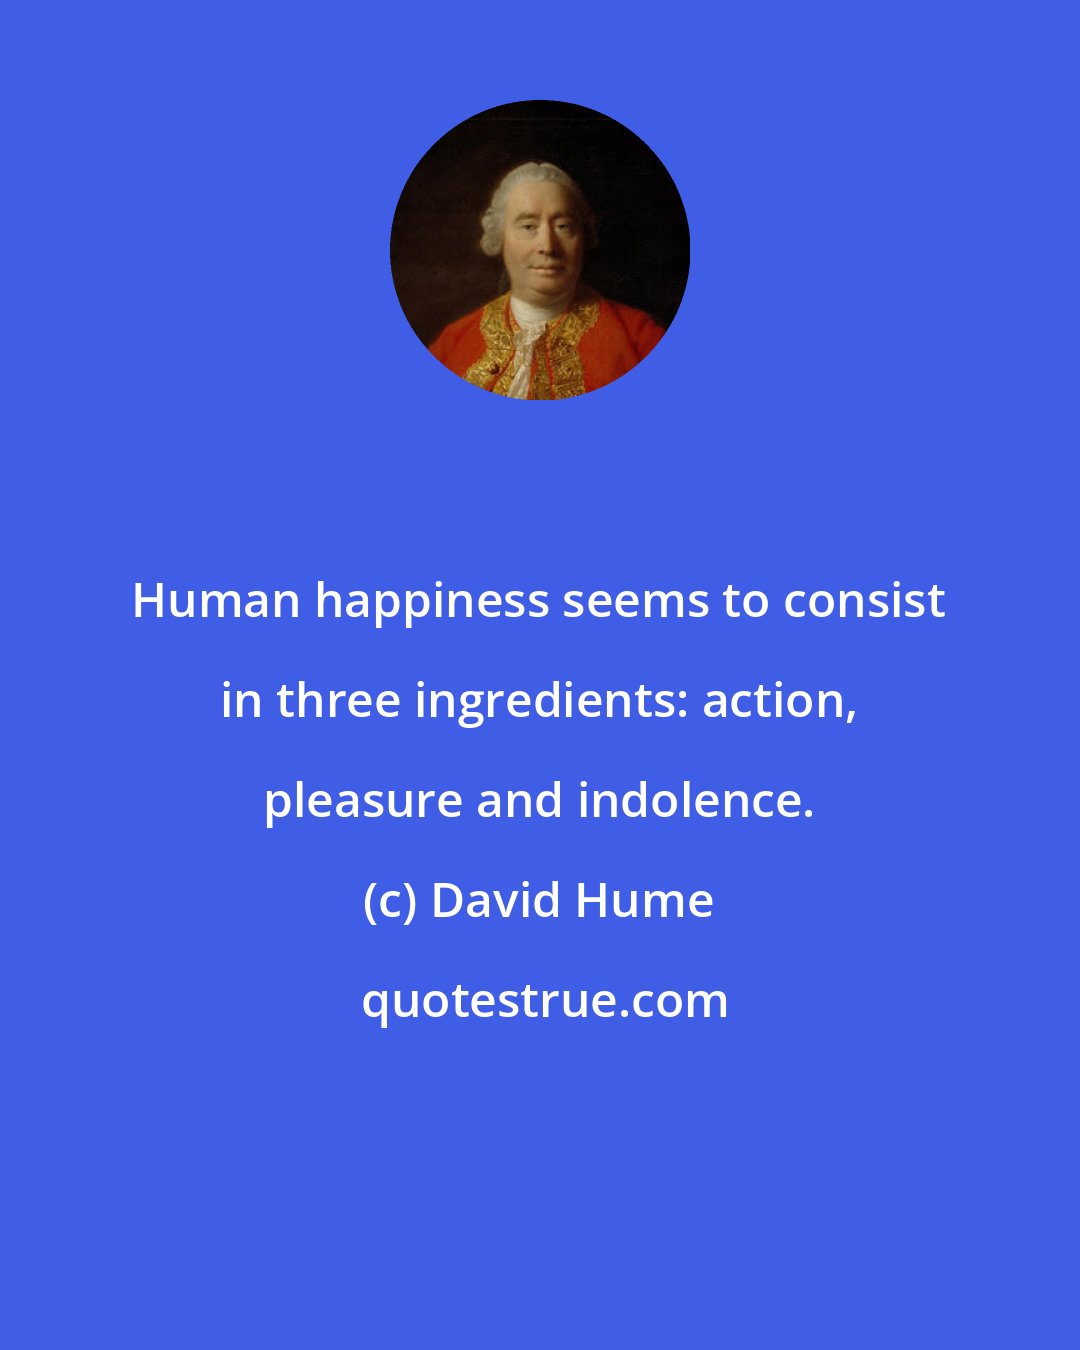 David Hume: Human happiness seems to consist in three ingredients: action, pleasure and indolence.